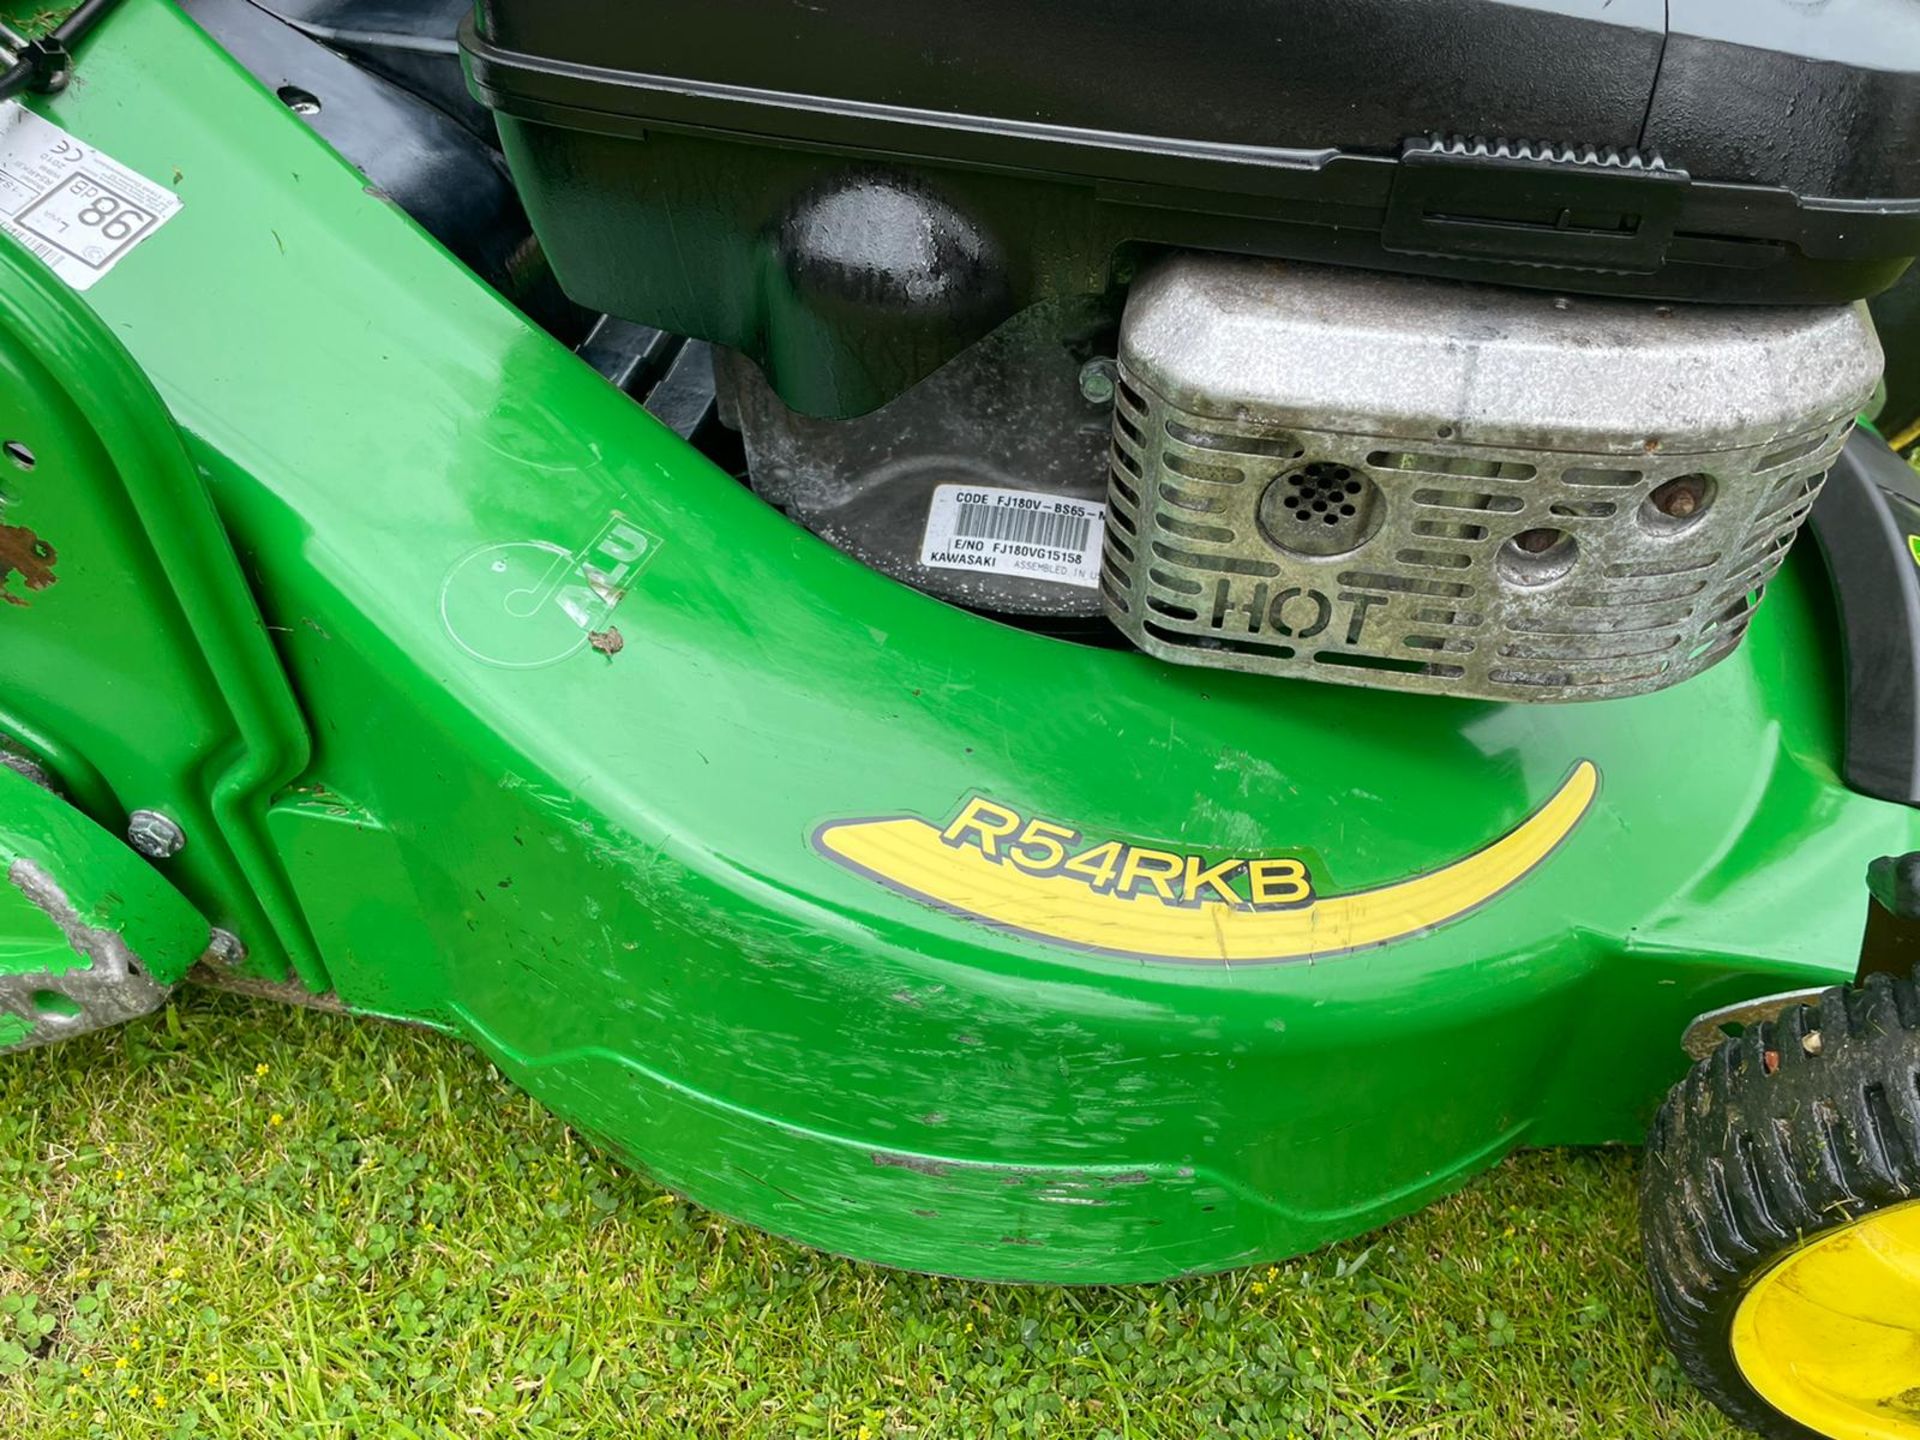 JOHN DEERE R54RKB SELF PROPELLED ROLLER LAWN MOWER WITH REAR COLLECTOR, RUNS DRIVES CUTS *NO VAT* - Image 8 of 9